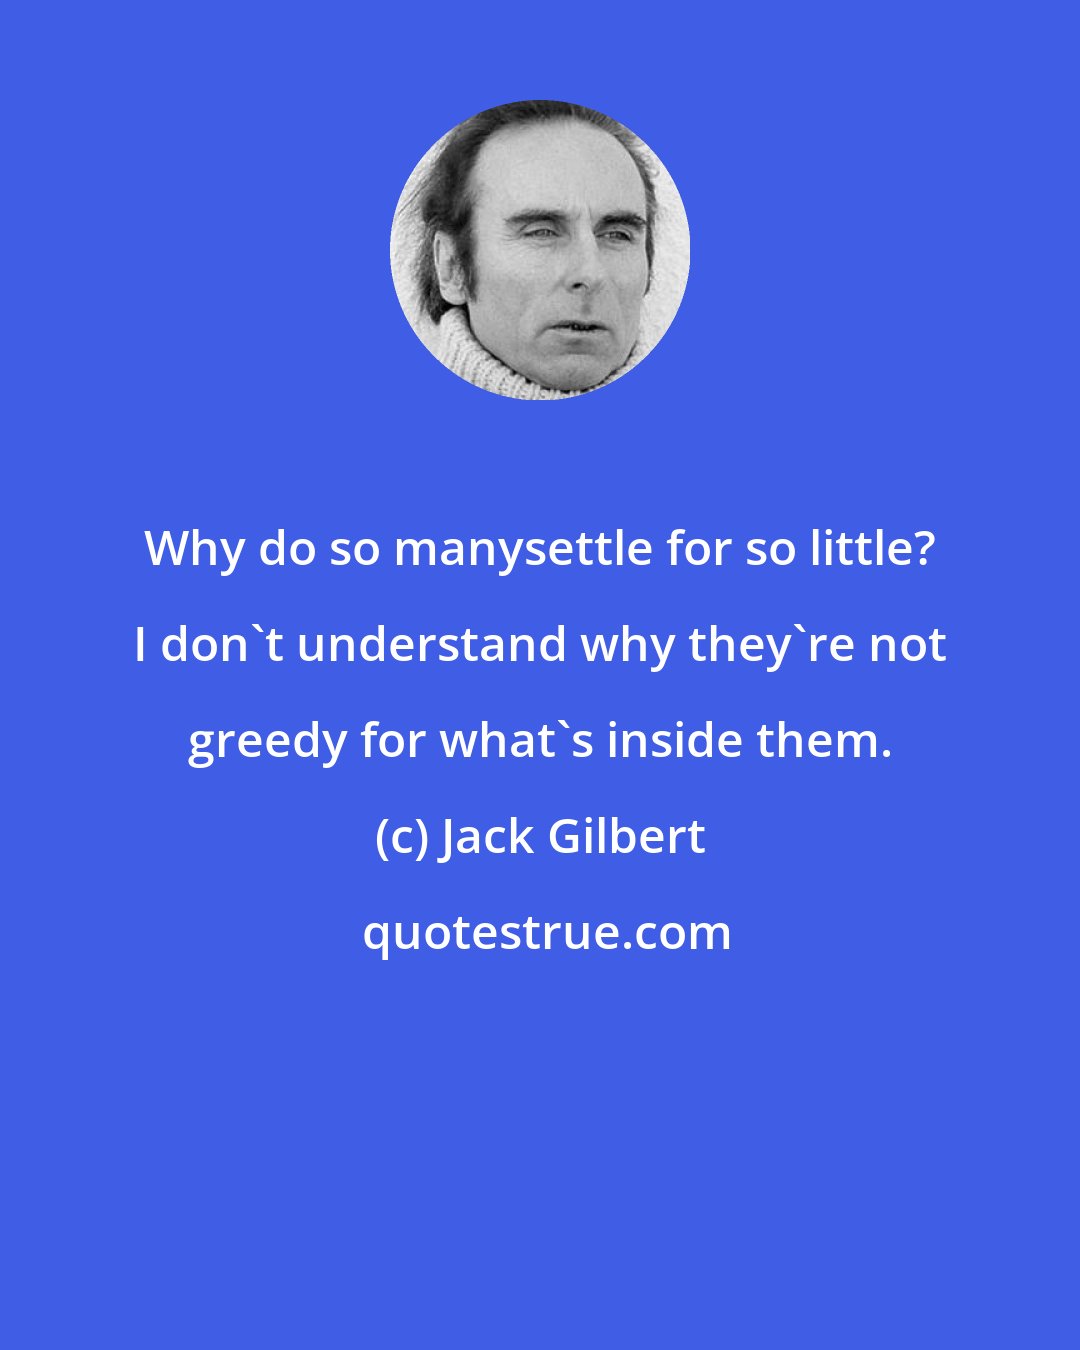 Jack Gilbert: Why do so manysettle for so little? I don't understand why they're not greedy for what's inside them.